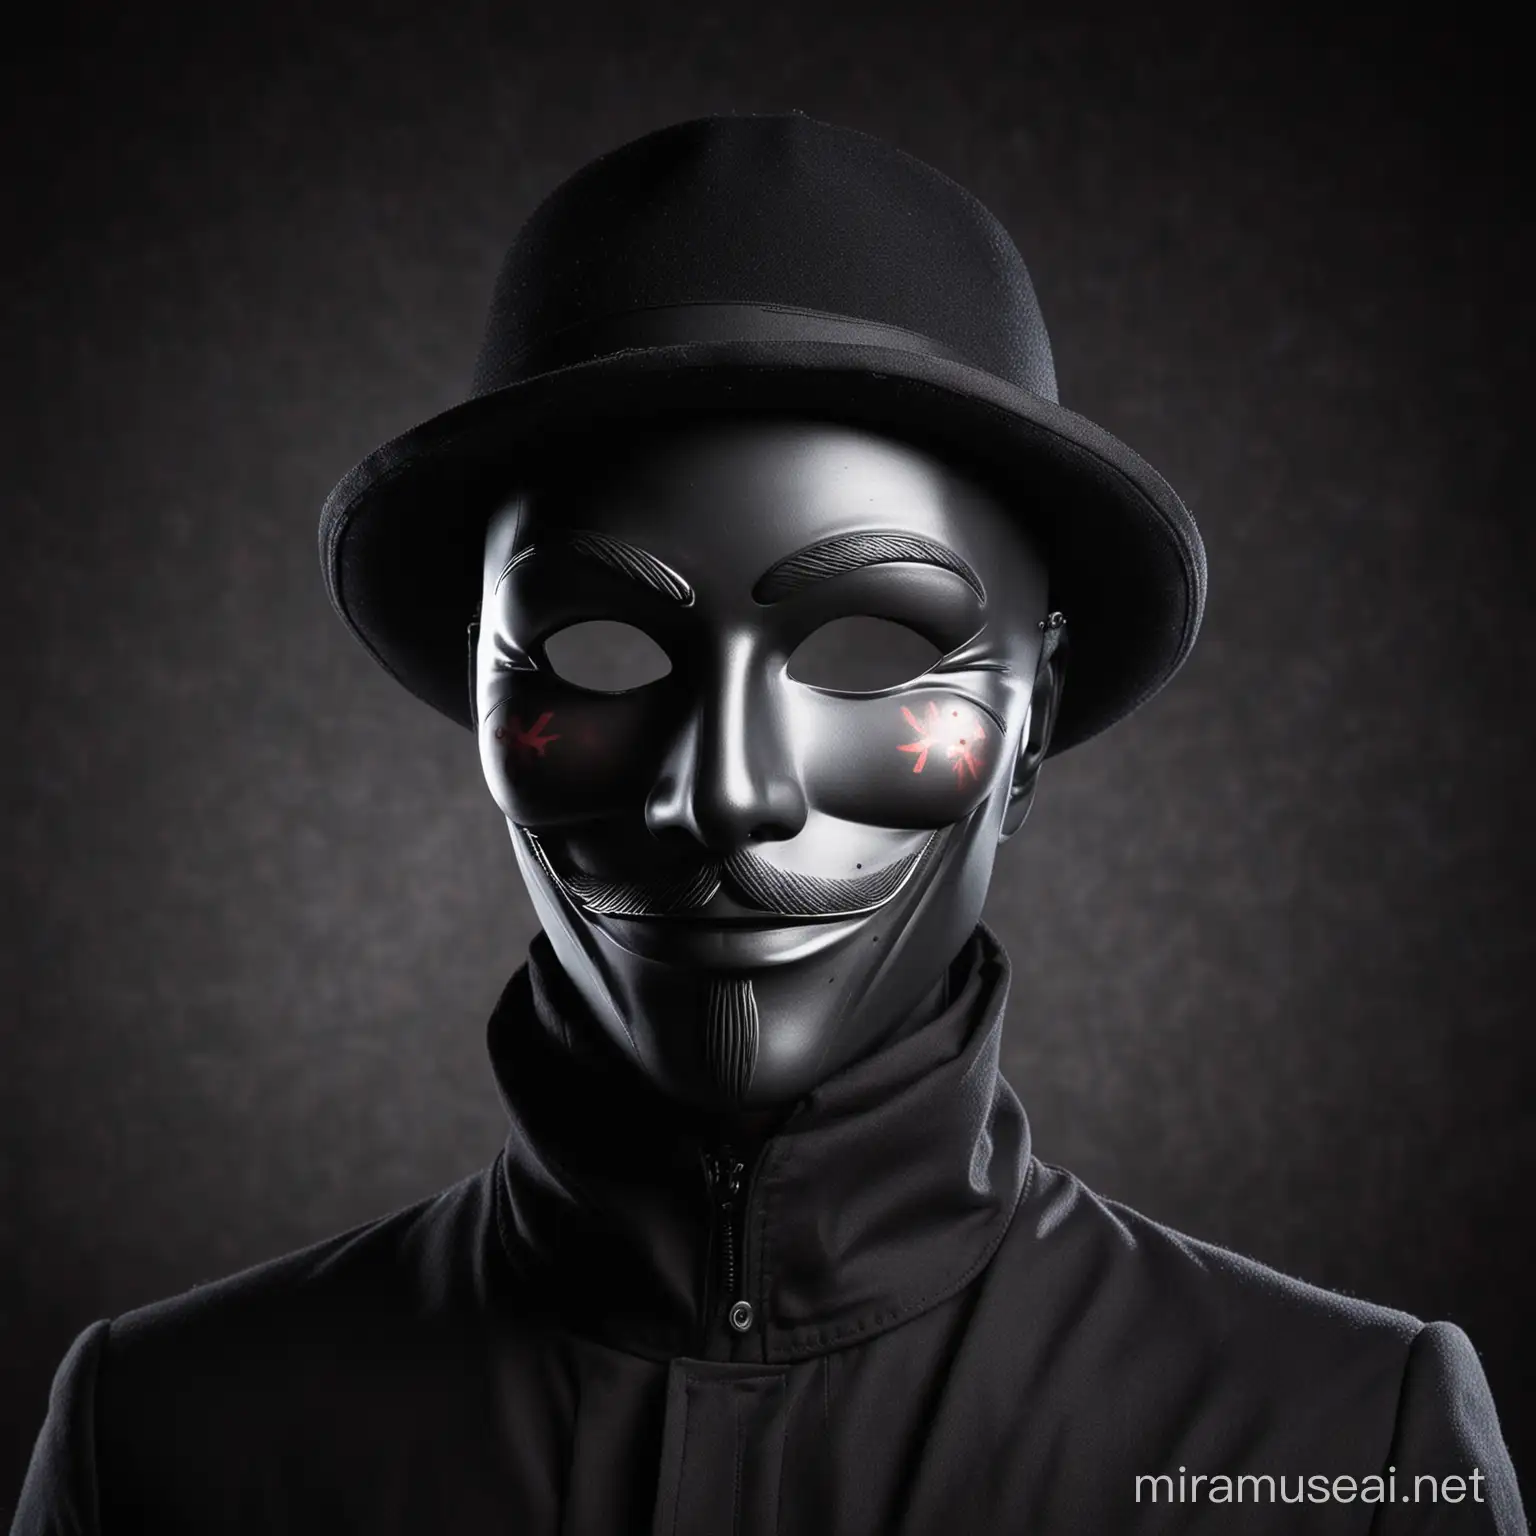 Mannequin in Guy Fawkes Mask against Cybersecurity Theme